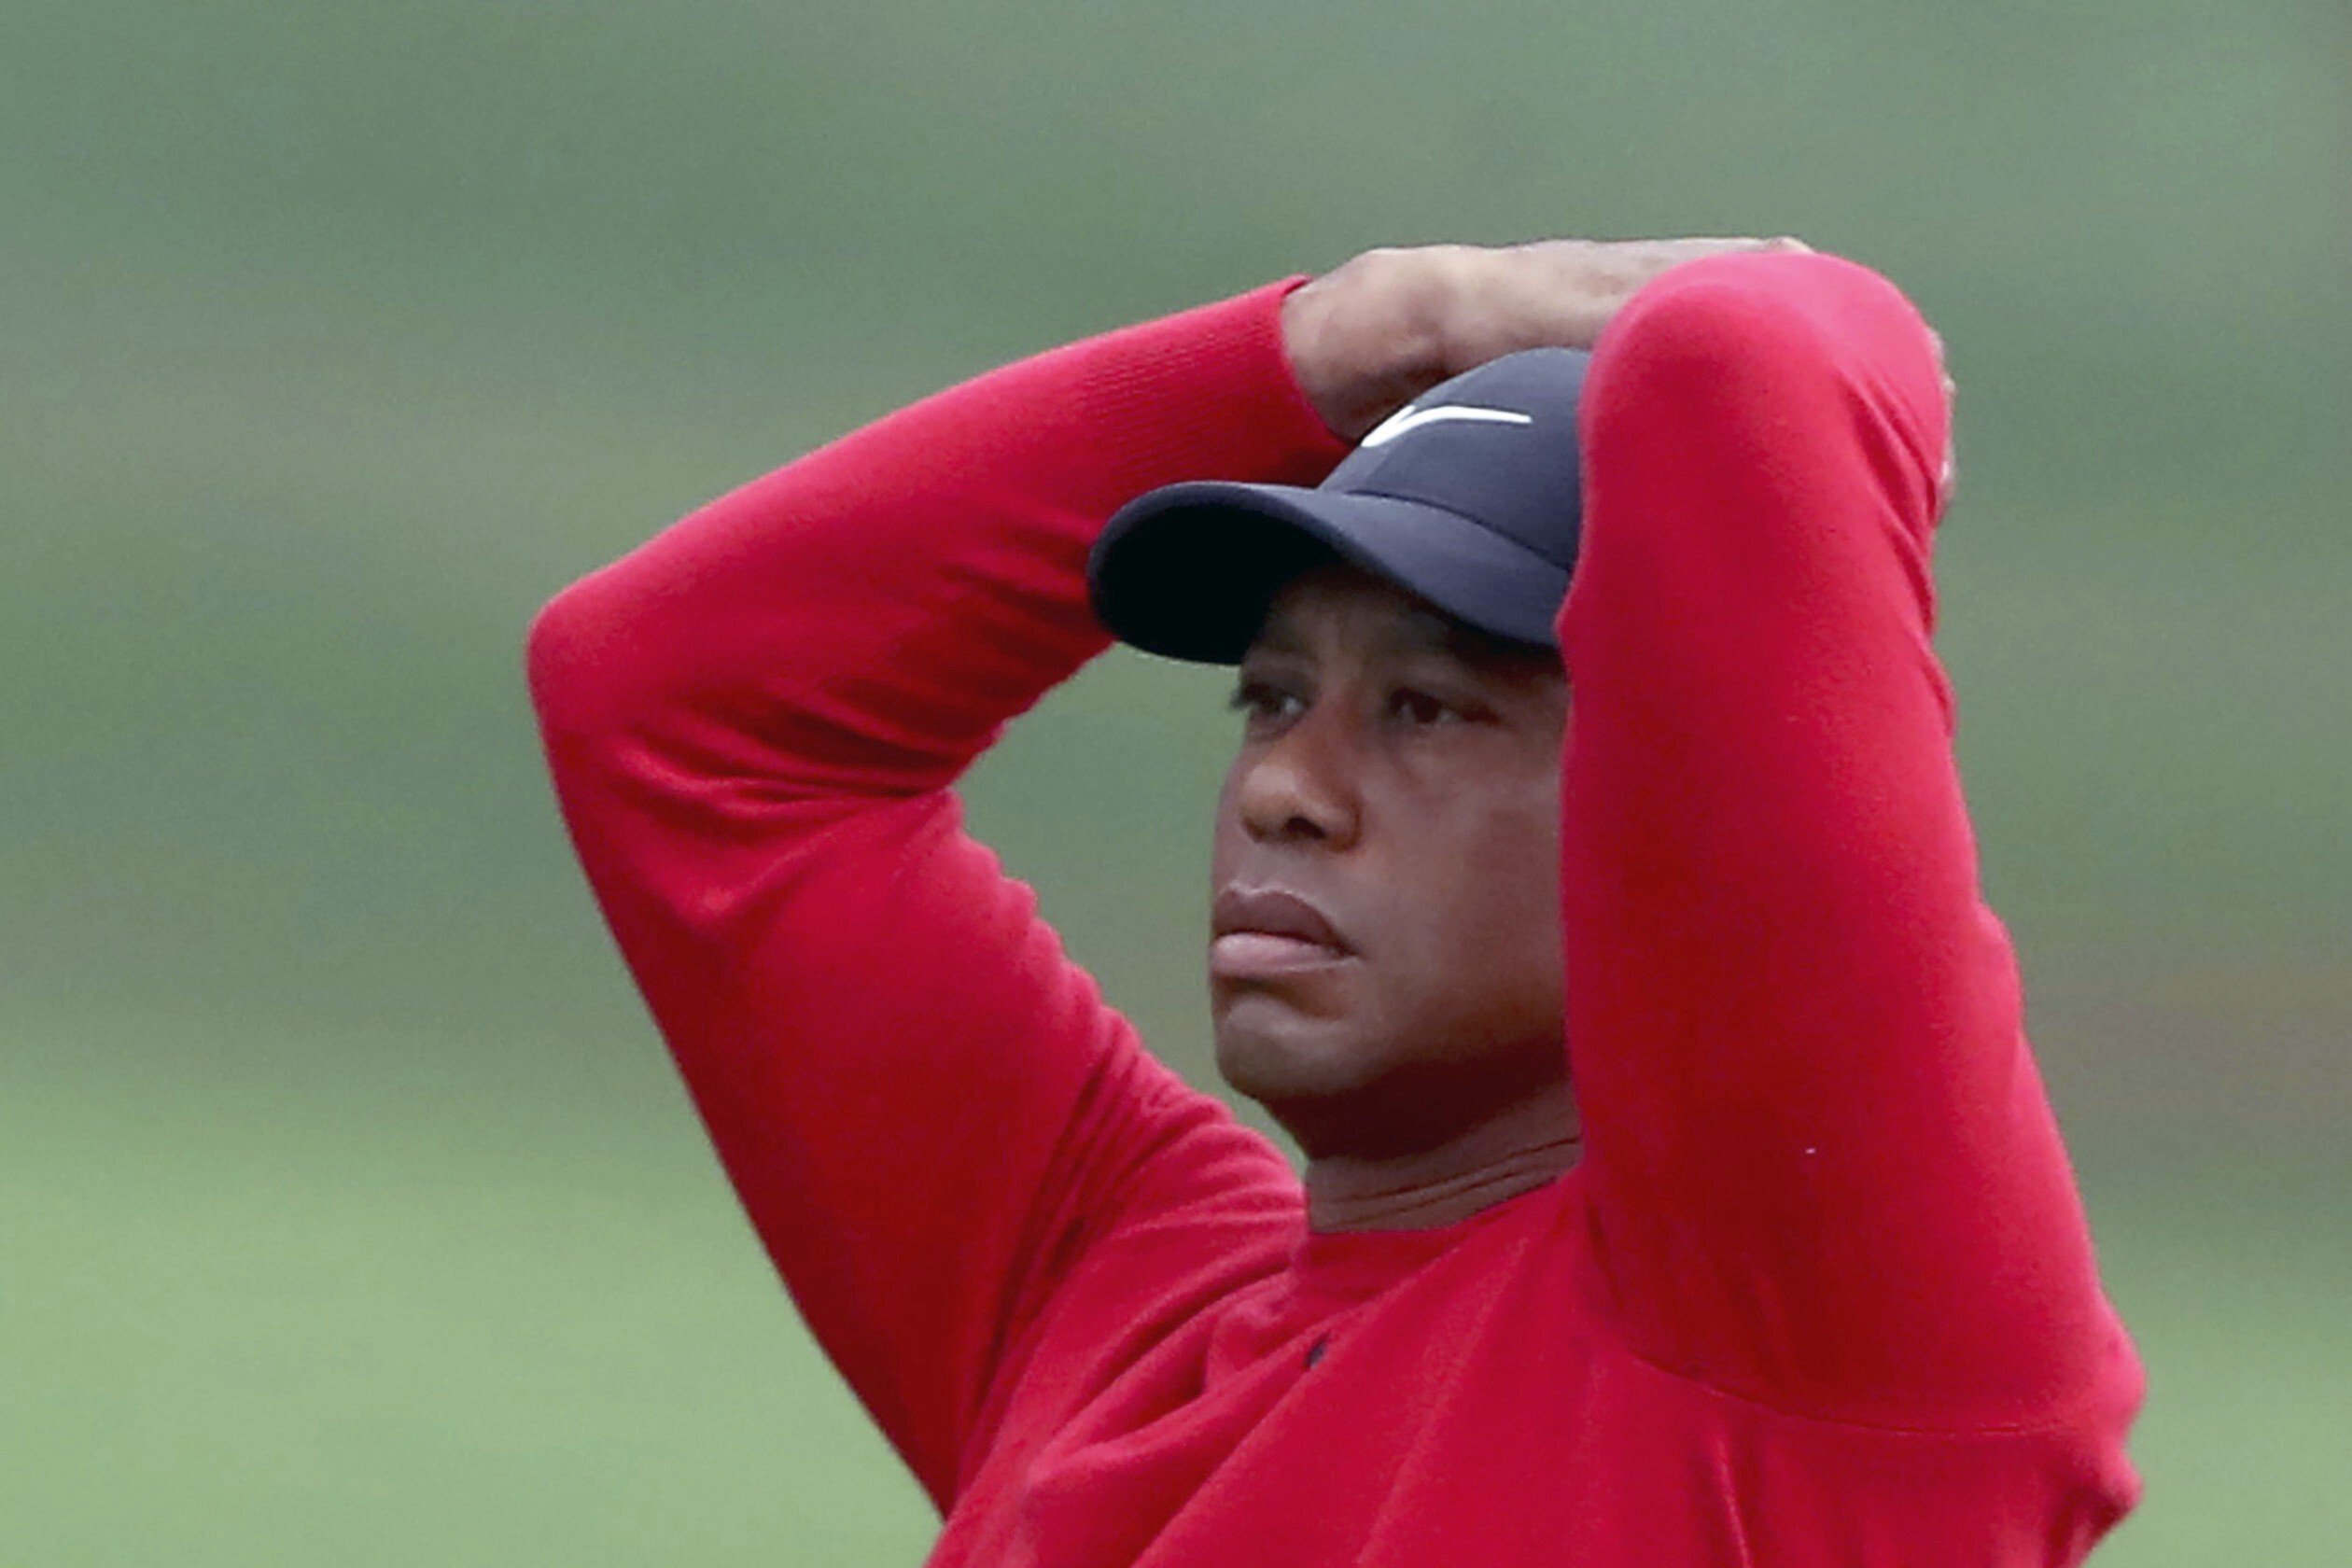 Tiger Woods endured a nightmare 12th hole making 10 shots on the par 3. Photo: AP